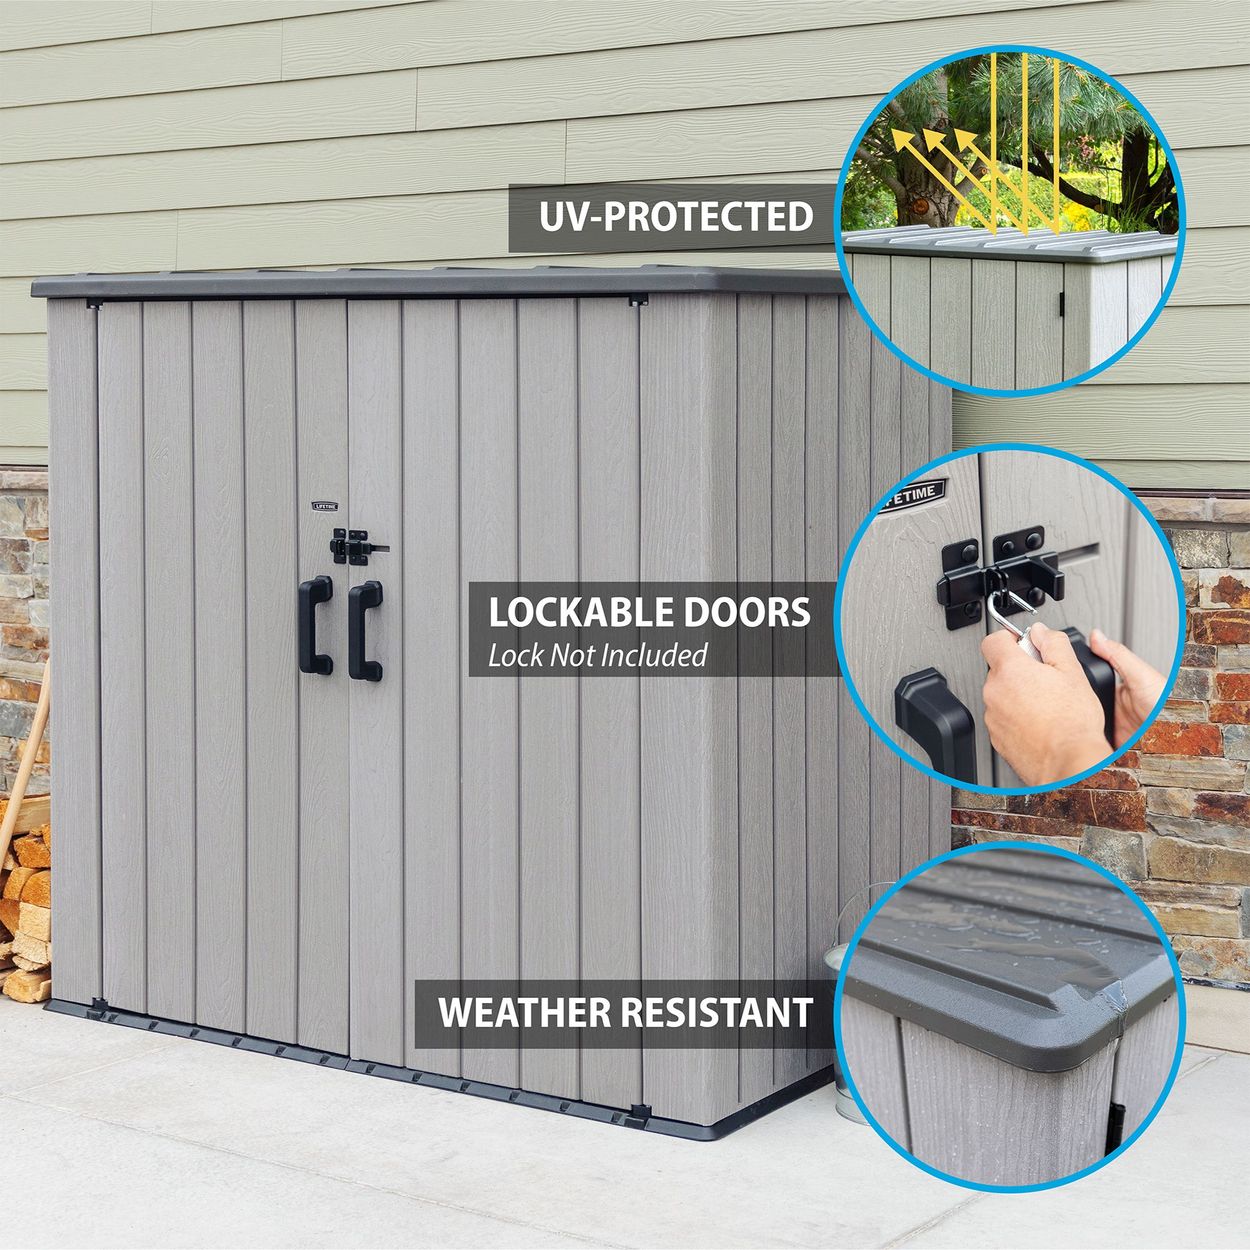 3/4 view of the utility shed and 3 bubbles showing the UV-Protection, Lockable Doors (Lock not included), and Weather resistant.